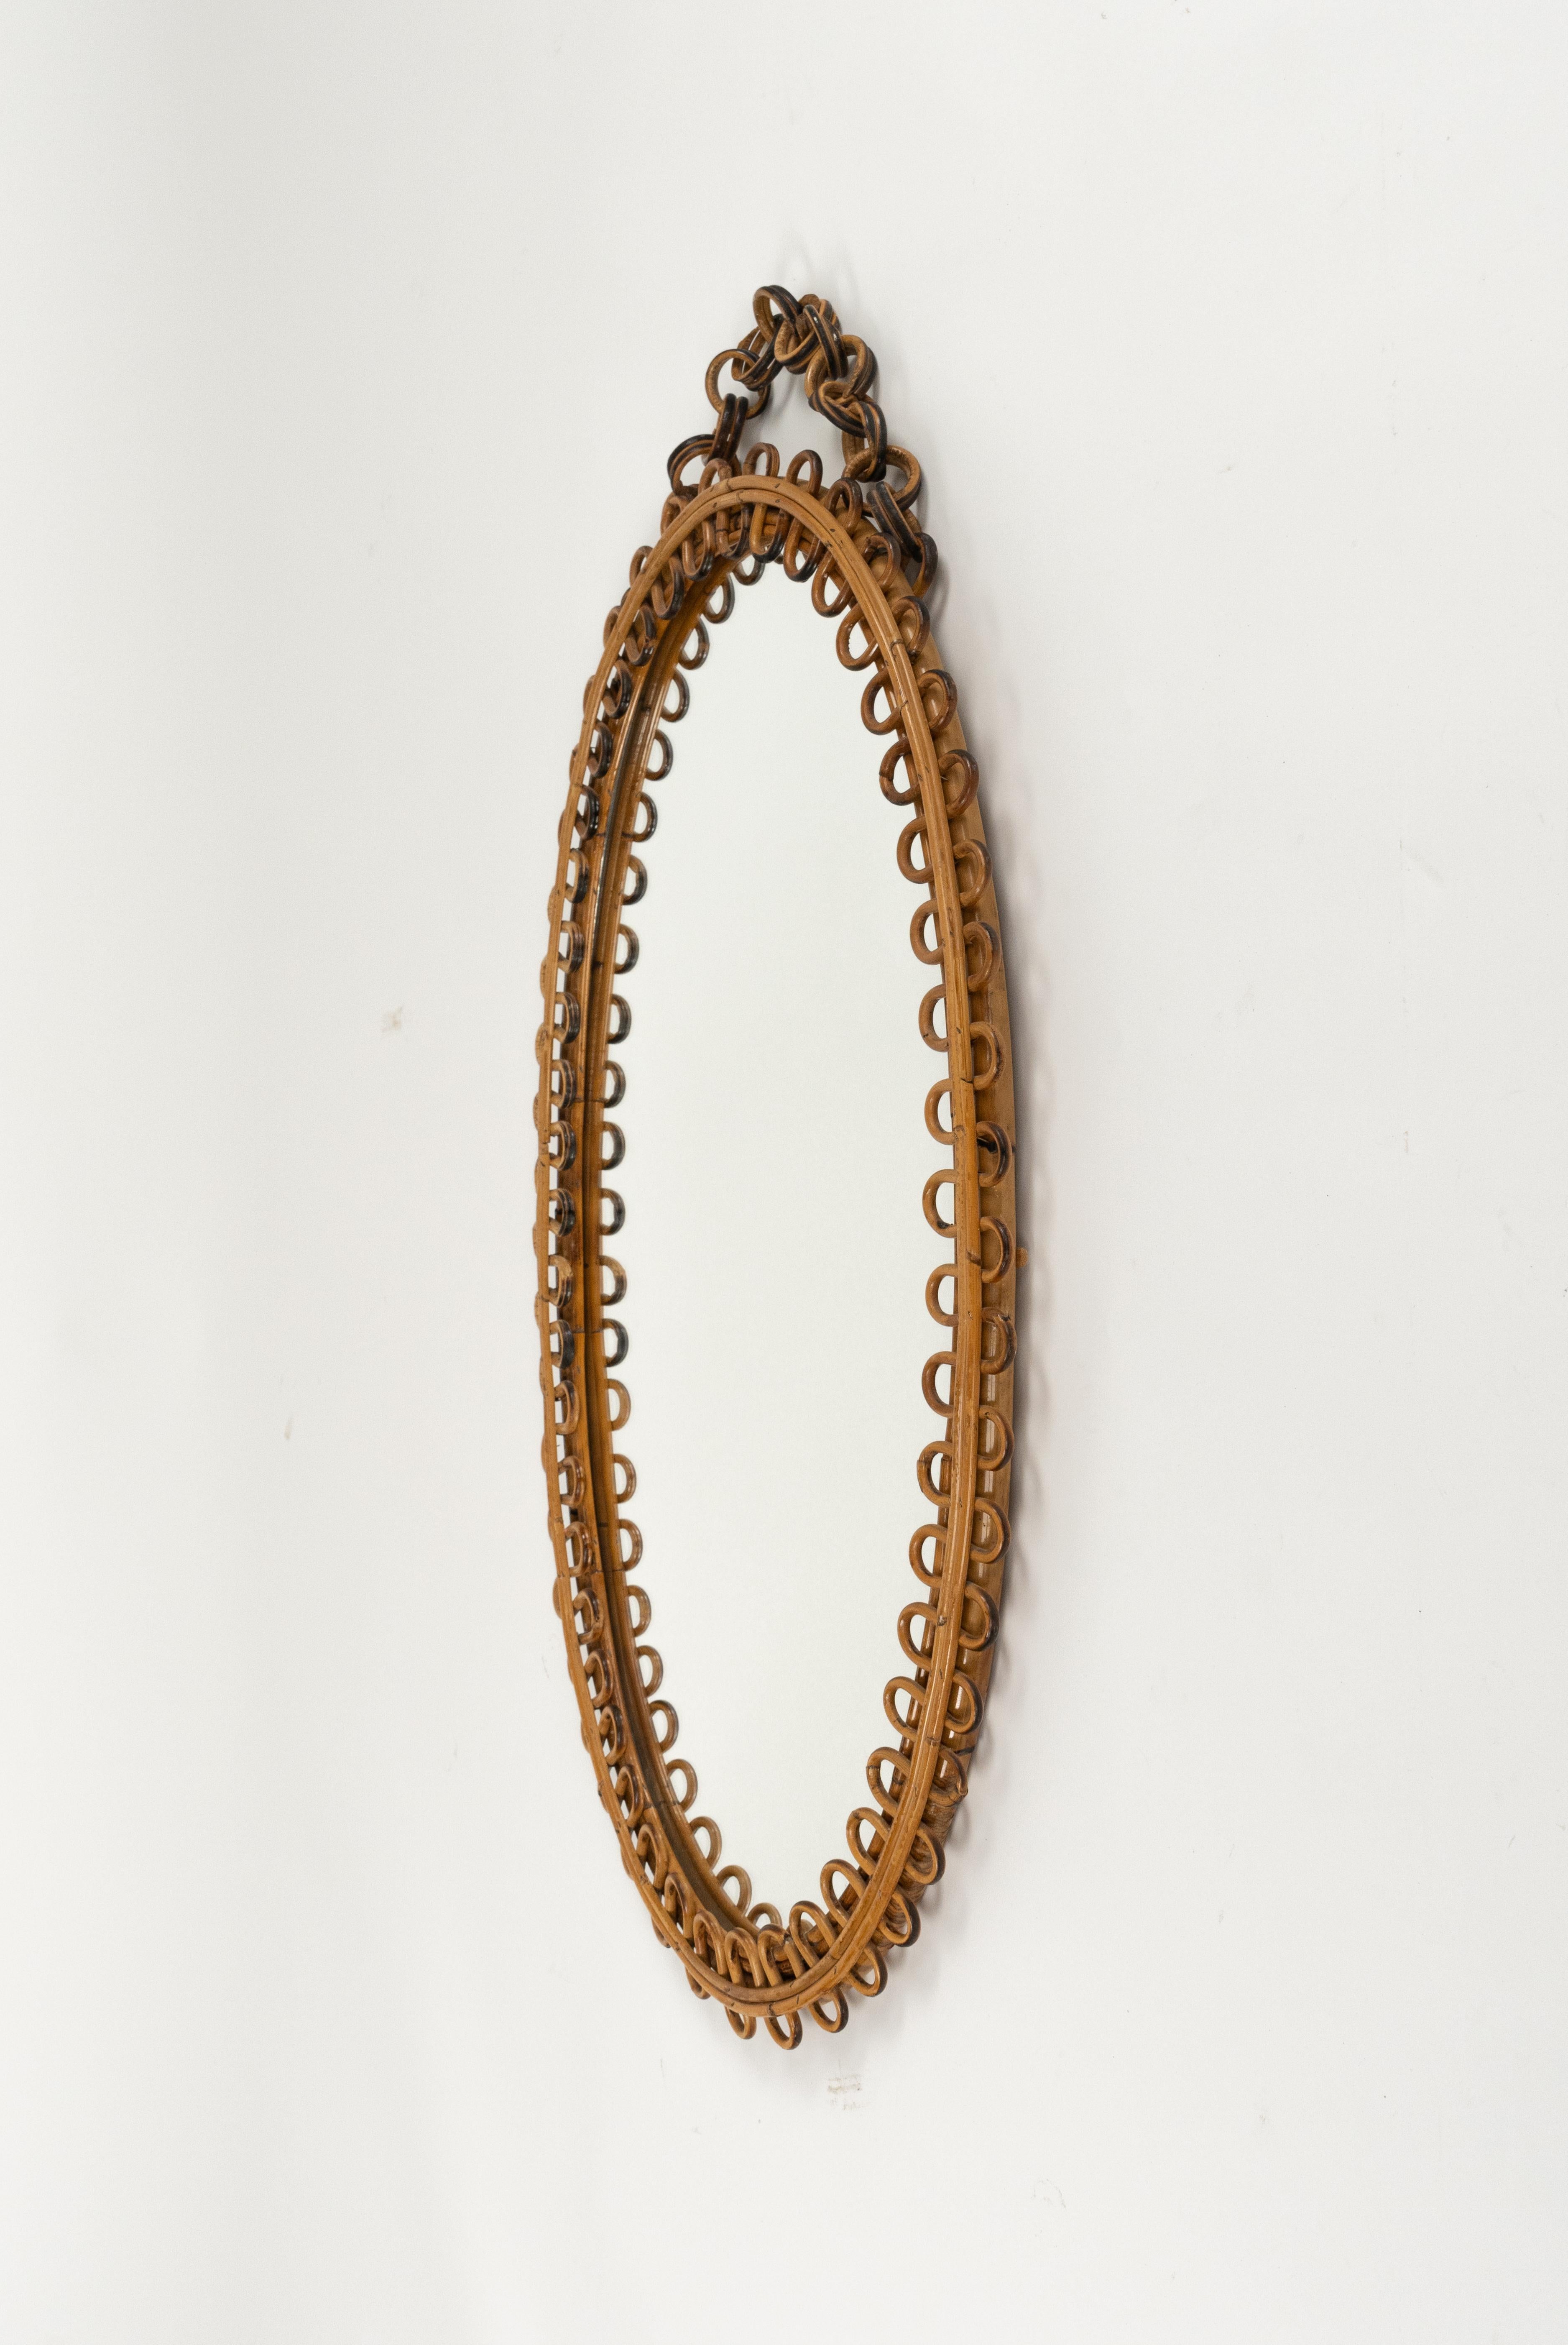 Rattan and Bamboo Oval Wall Mirror with Chain Franco Albini Style, Italy, 1960s For Sale 4